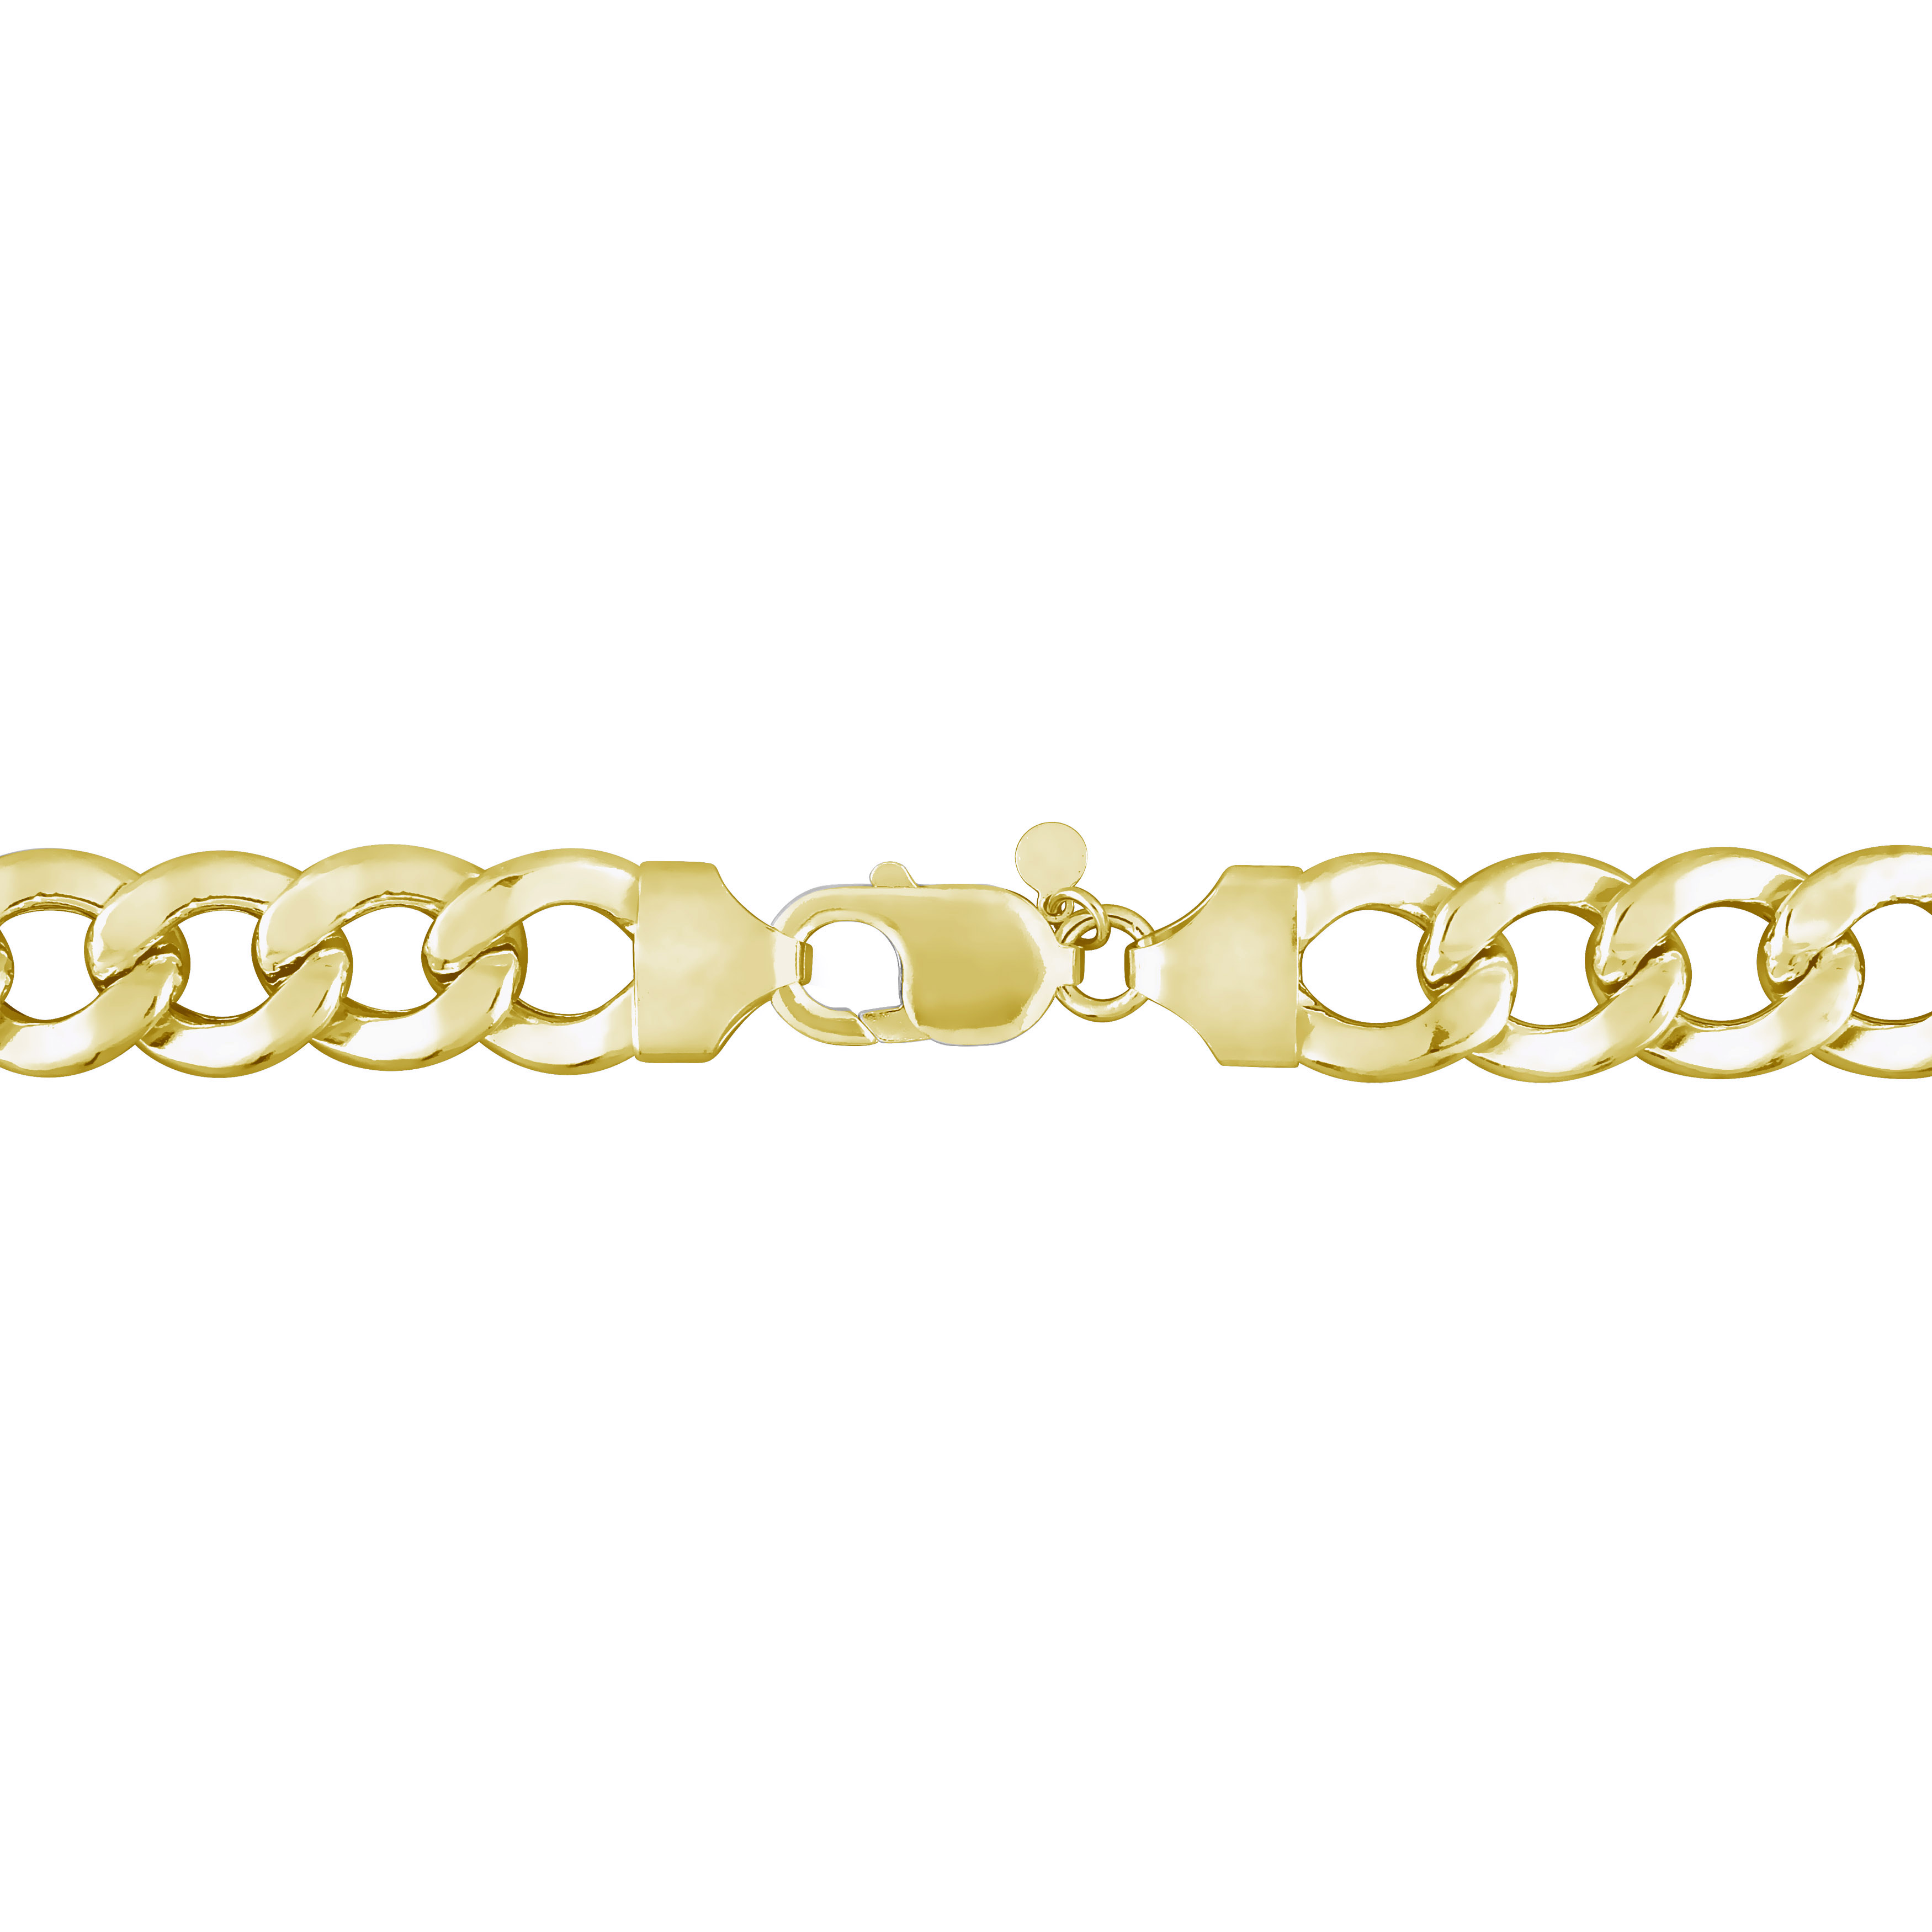 12.5mm Curb Link Bracelet in 18k Yellow Gold Plated Sterling Silver - 9 in.